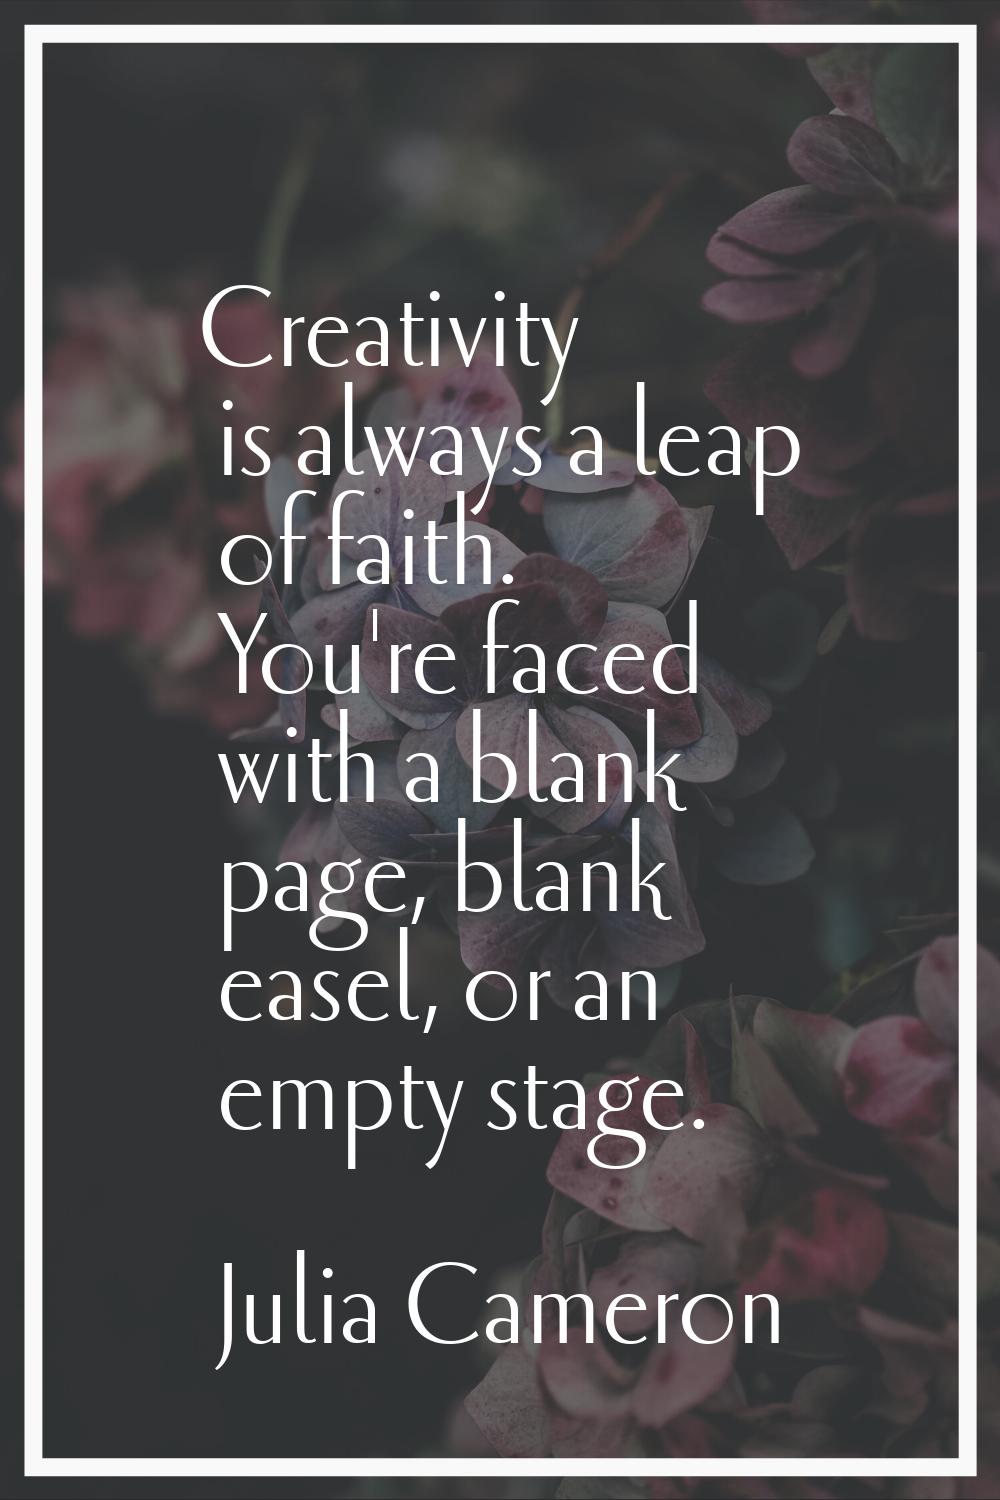 Creativity is always a leap of faith. You're faced with a blank page, blank easel, or an empty stag